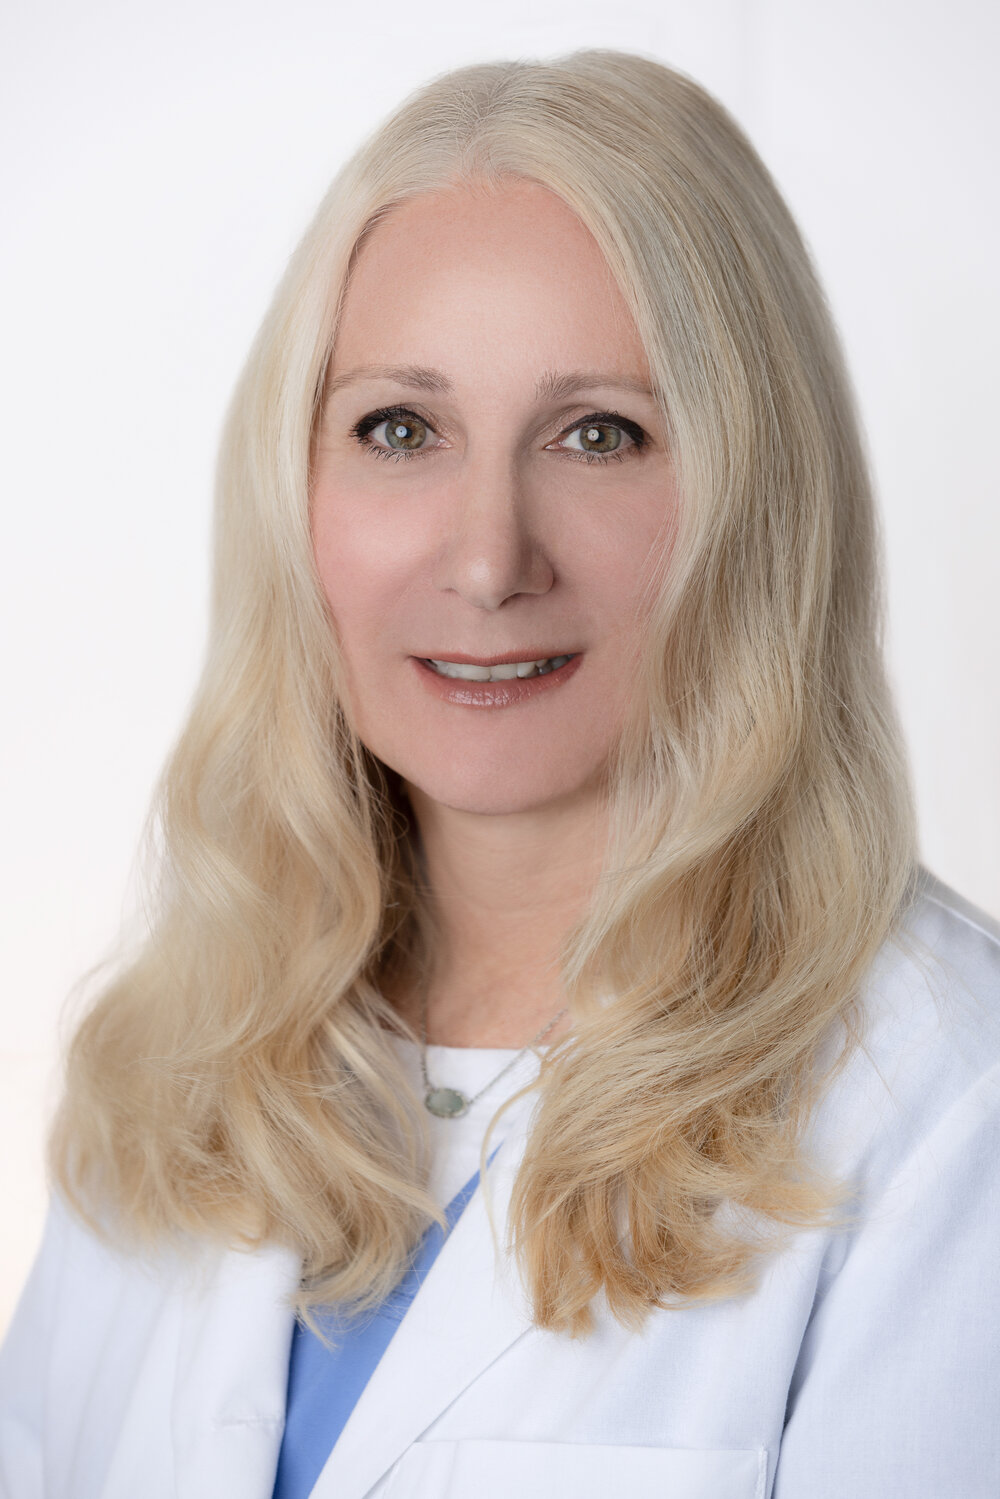 Theresa Ferreter is a family nurse practitioner and medical supervisor at Family Integrative Medicine, an Orlando-based practice with locations in Altamonte Springs, Baldwin Park, DeLand, Melbourne and South Orlando.